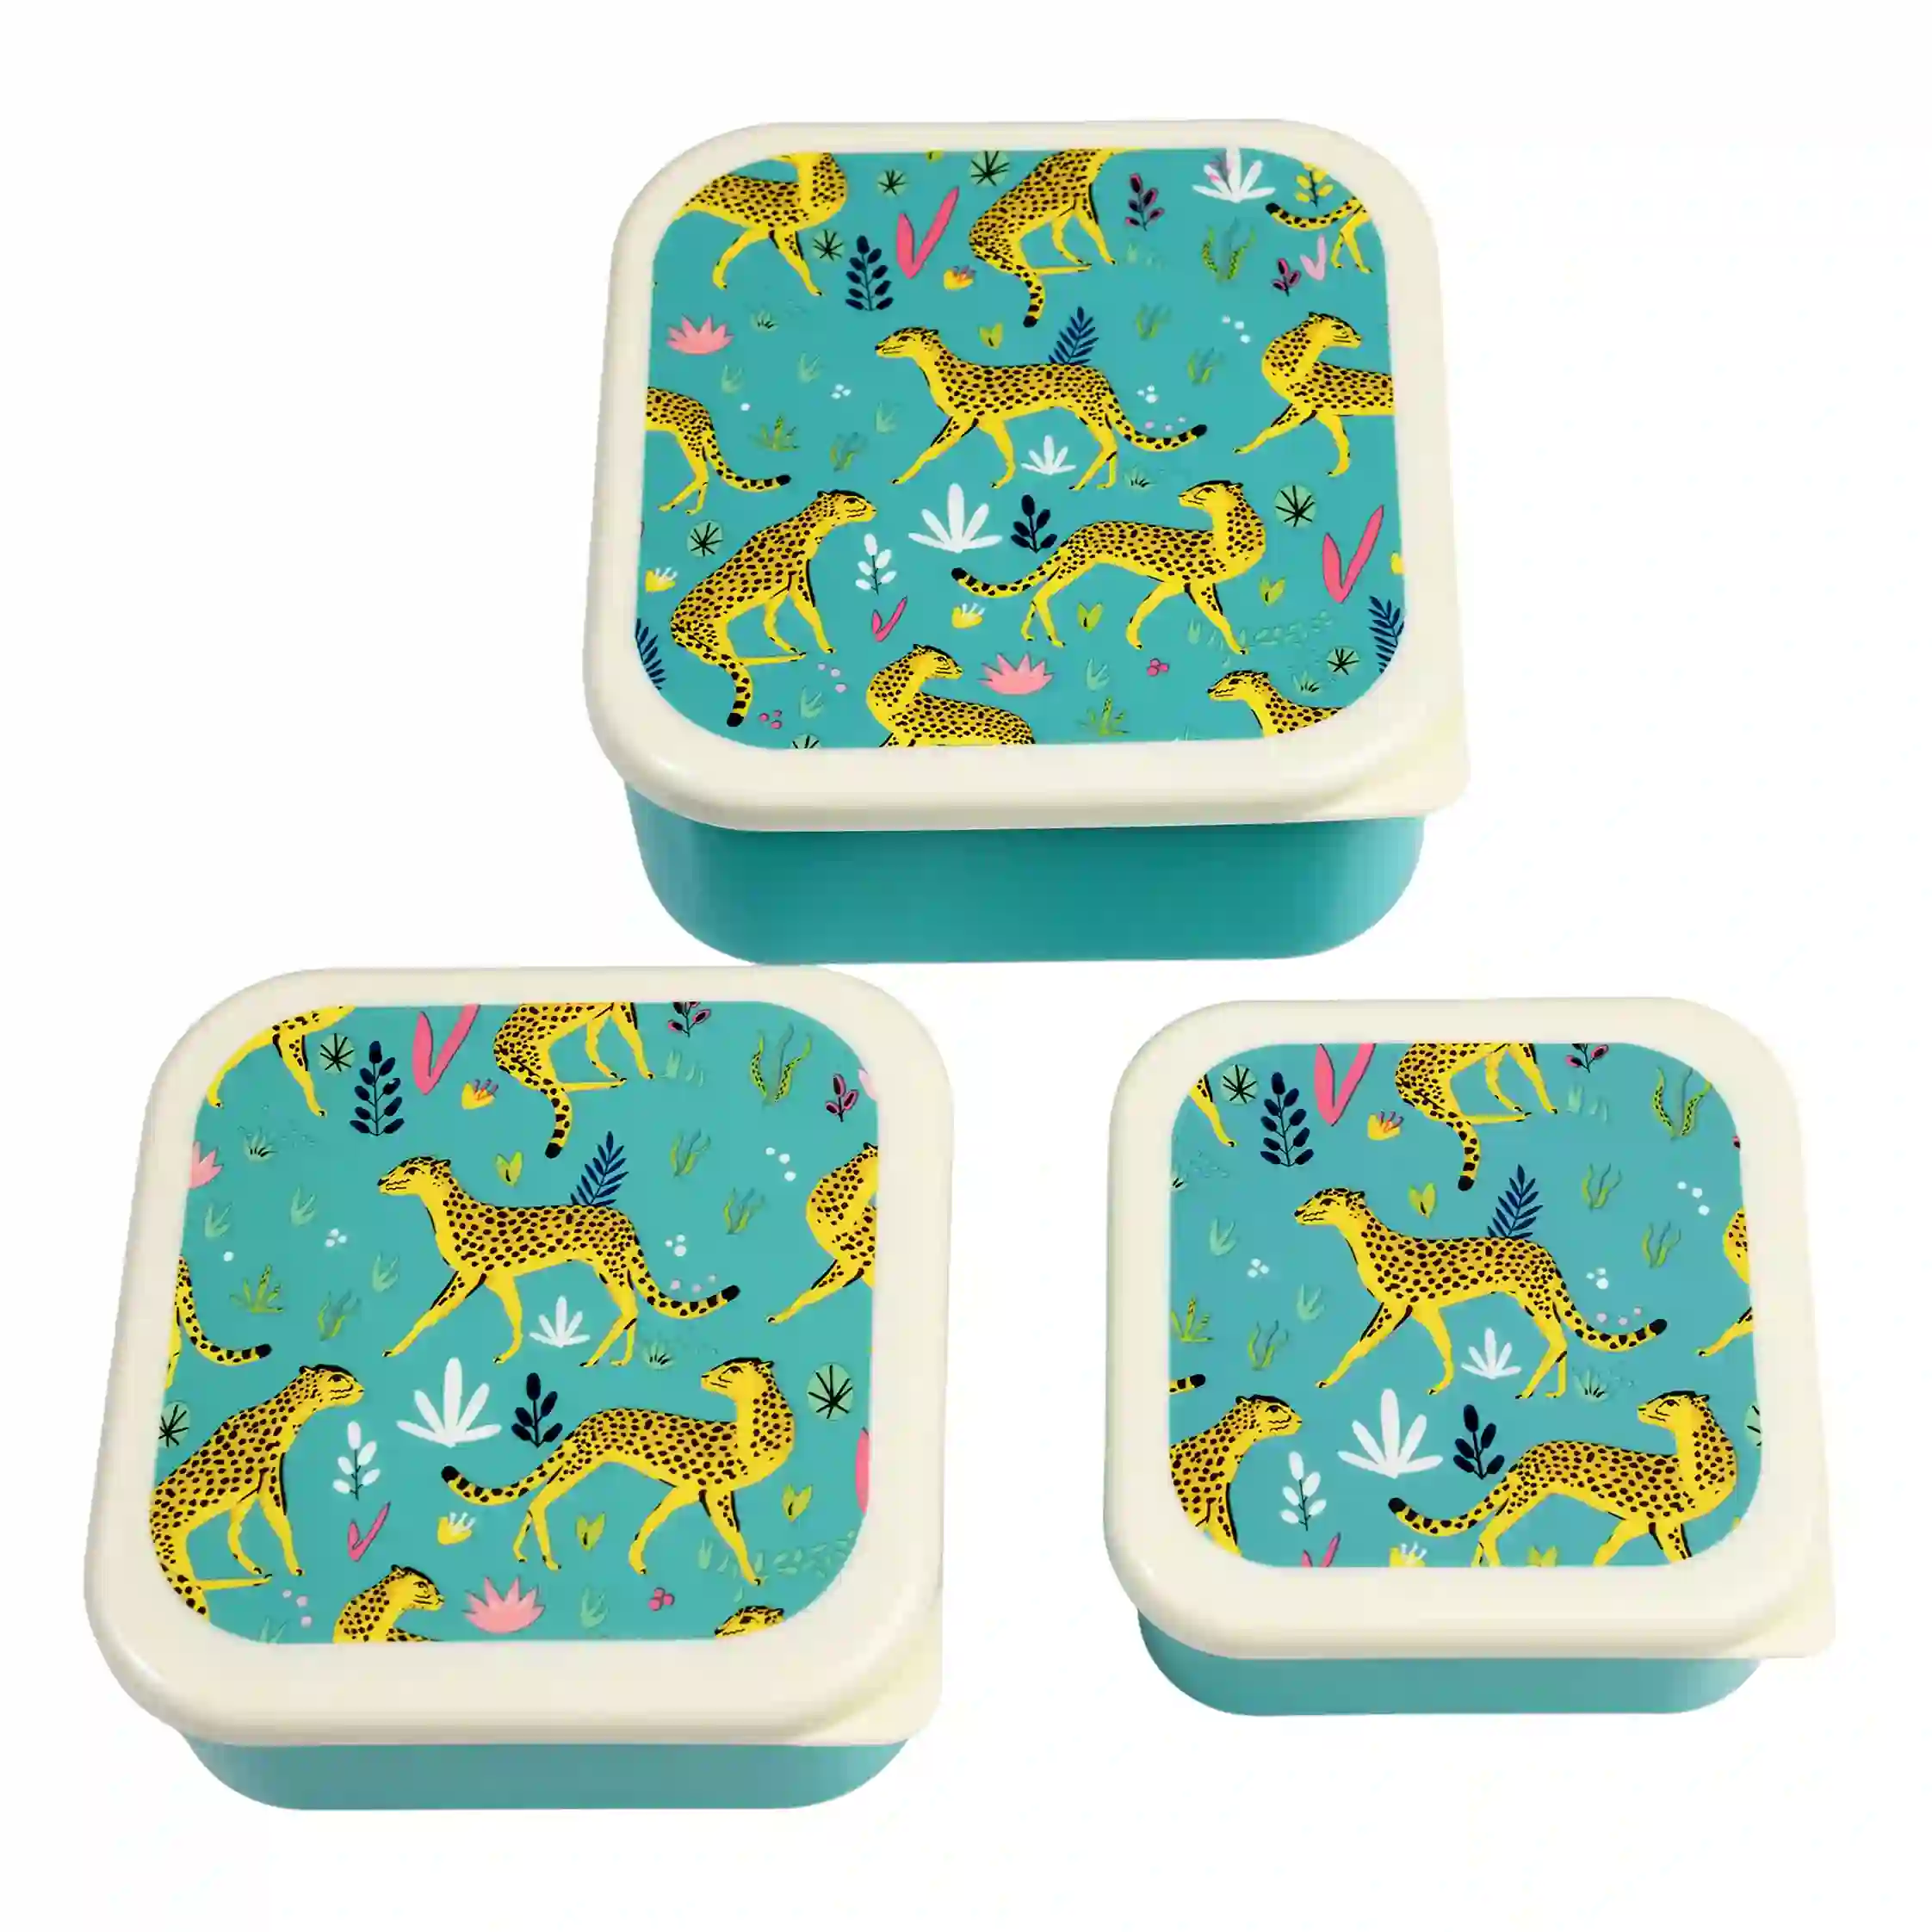 snack boxes (set of 3) - cheetah